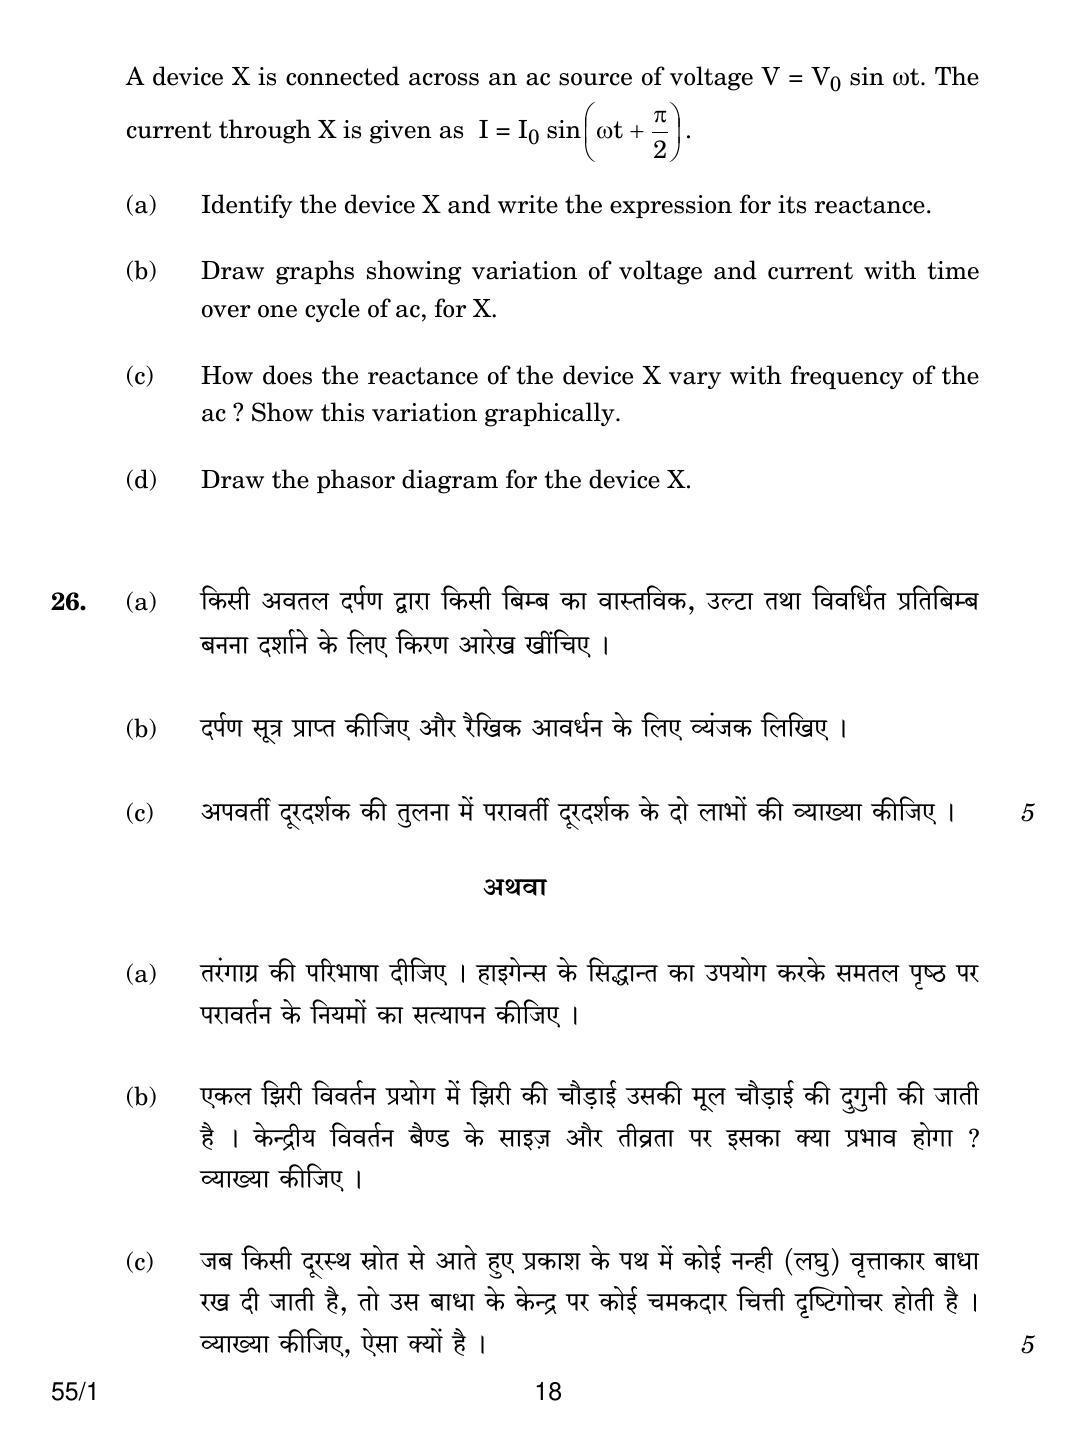 CBSE Class 12 55-1 PHYSICS 2018 Question Paper - Page 18